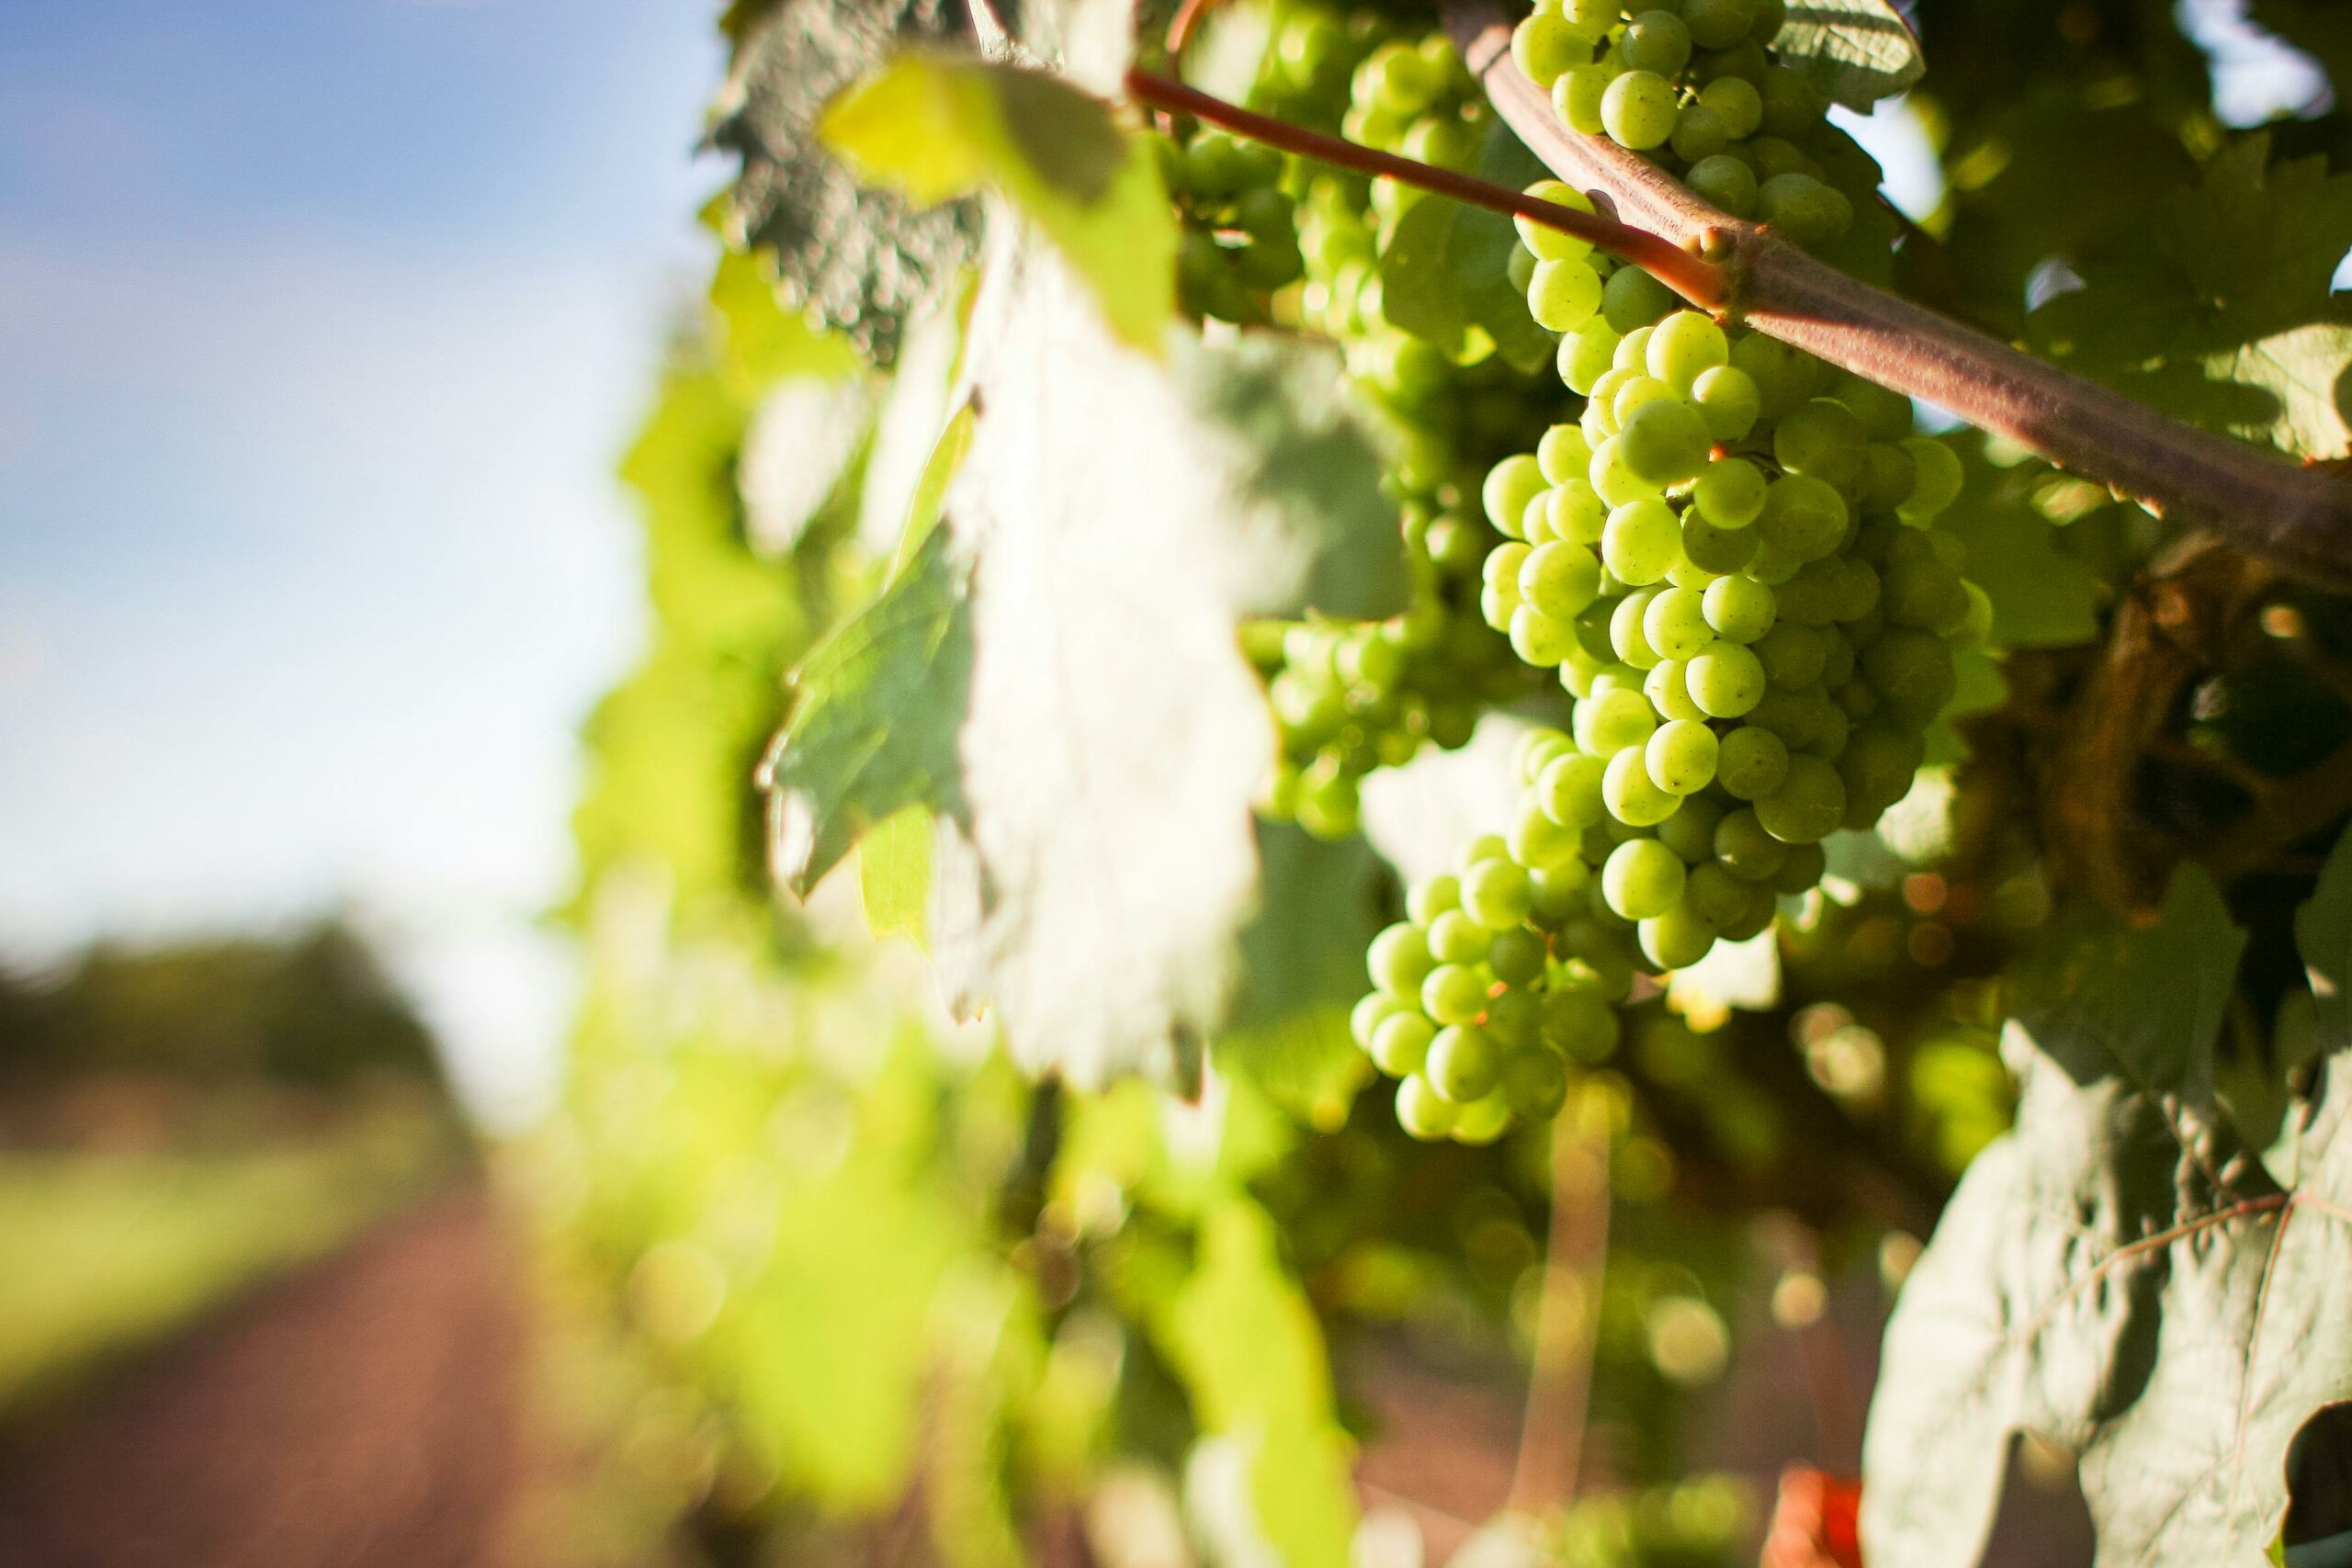 The health benefits of grapeseed oil, according to dietitians